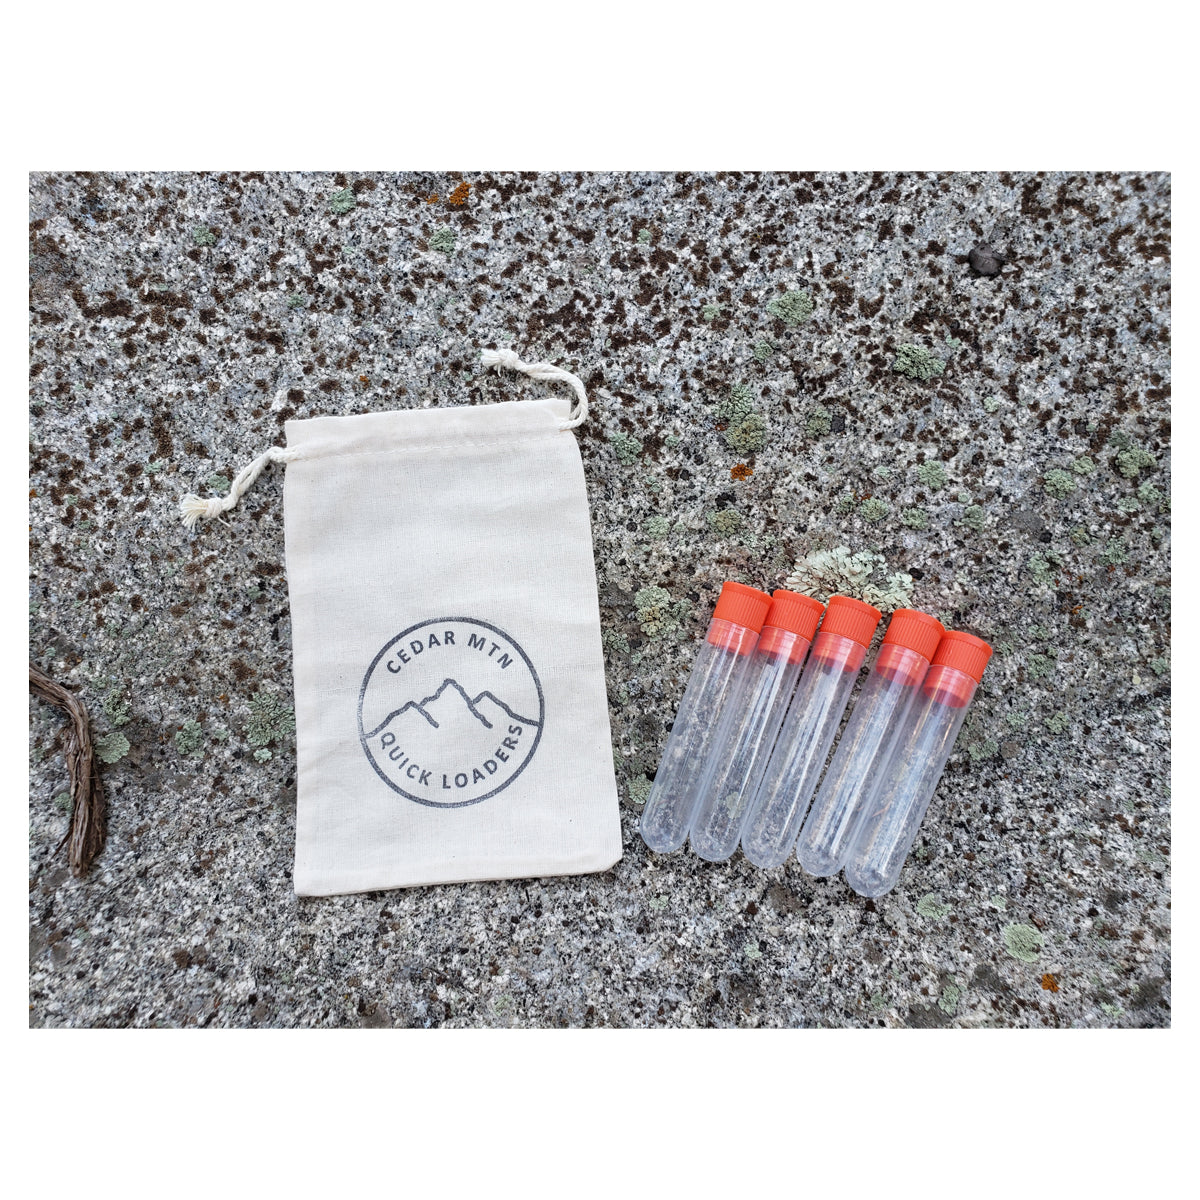 Cedar Mtn Quick Loaders Extra Charge Tubes in  by GOHUNT | Cedar Mtn Quick Loaders - GOHUNT Shop